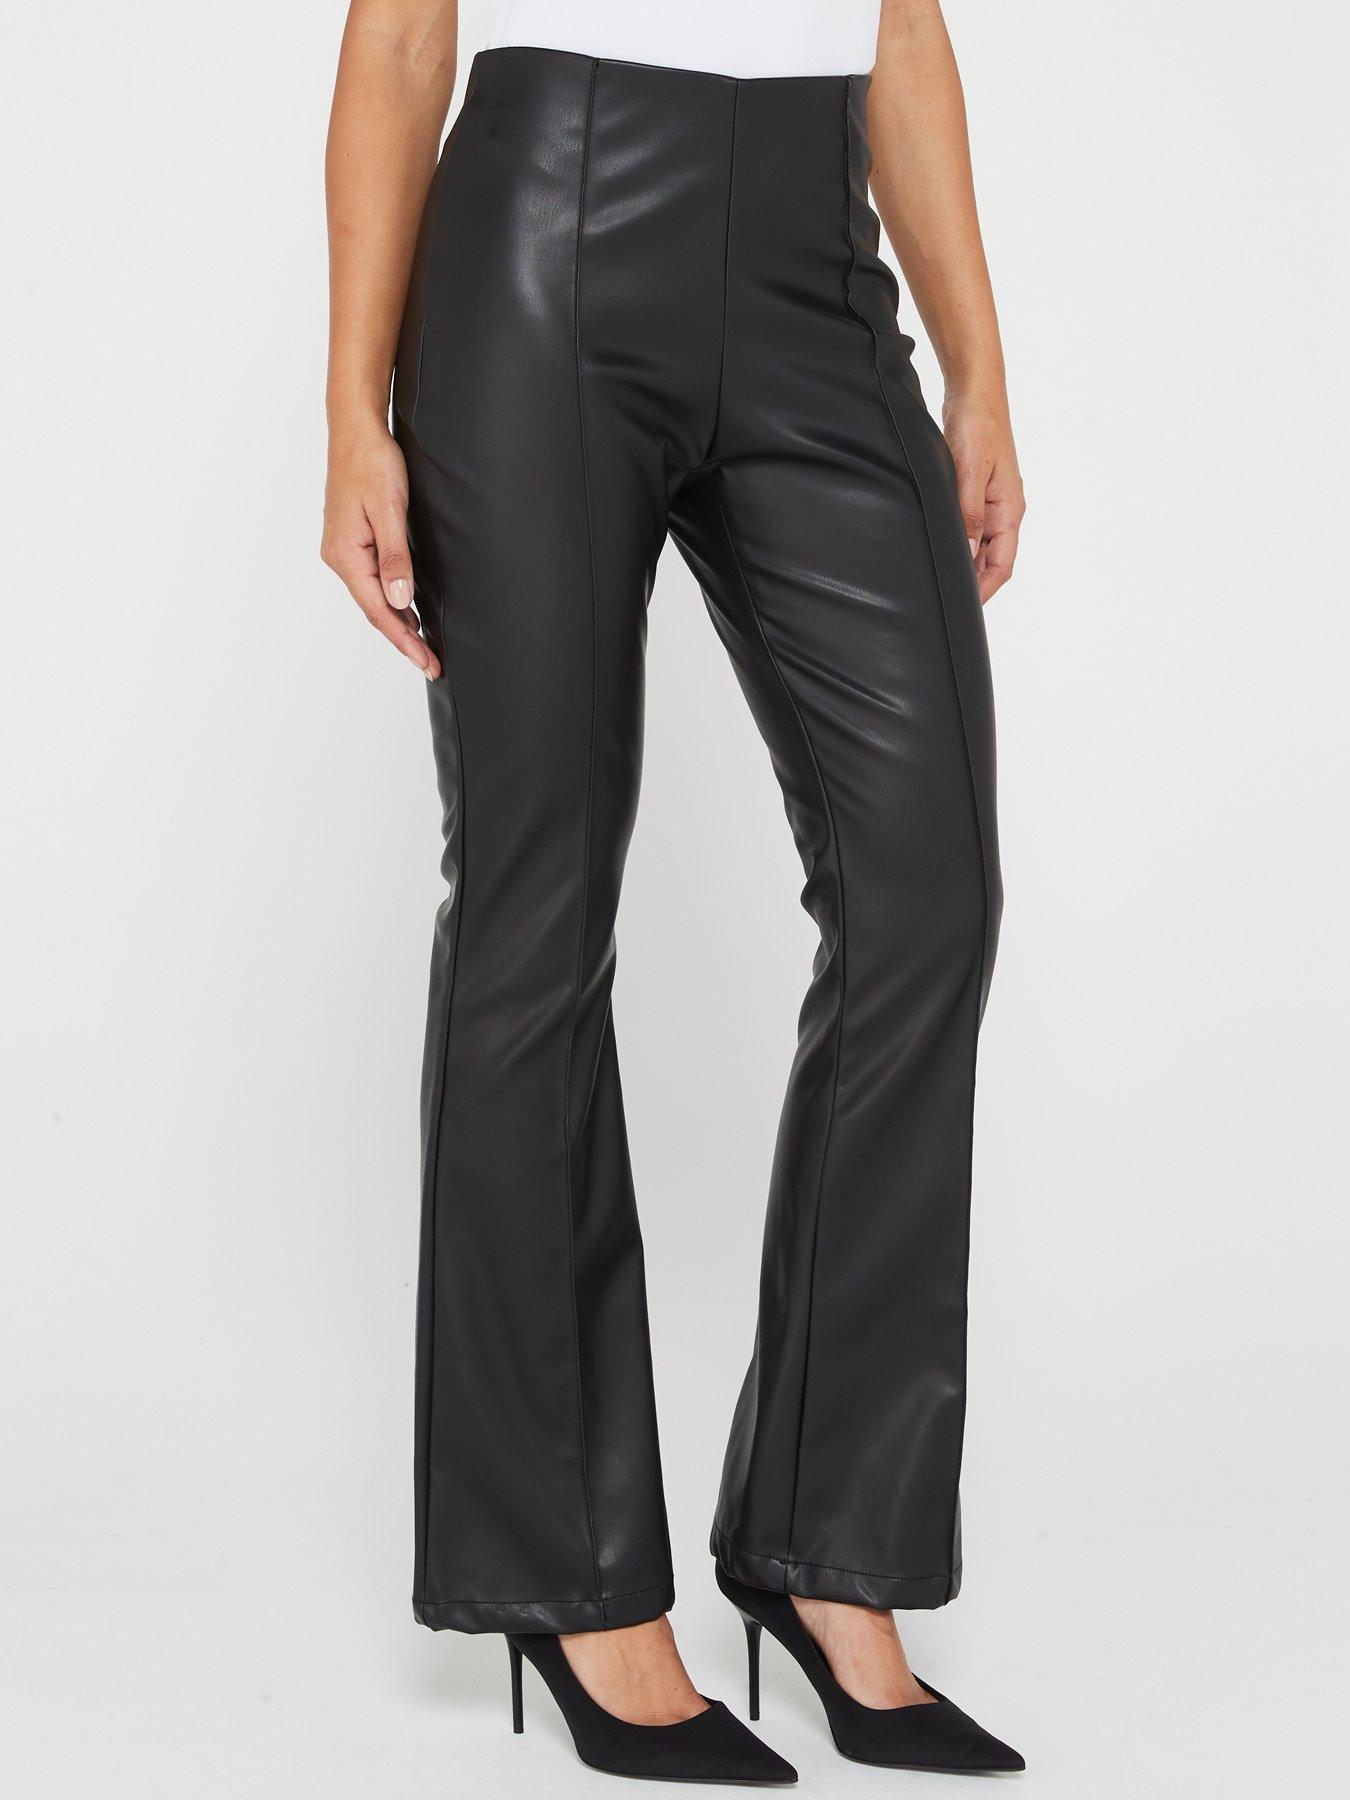 V by Very Faux Leather Utility Joggers - Black